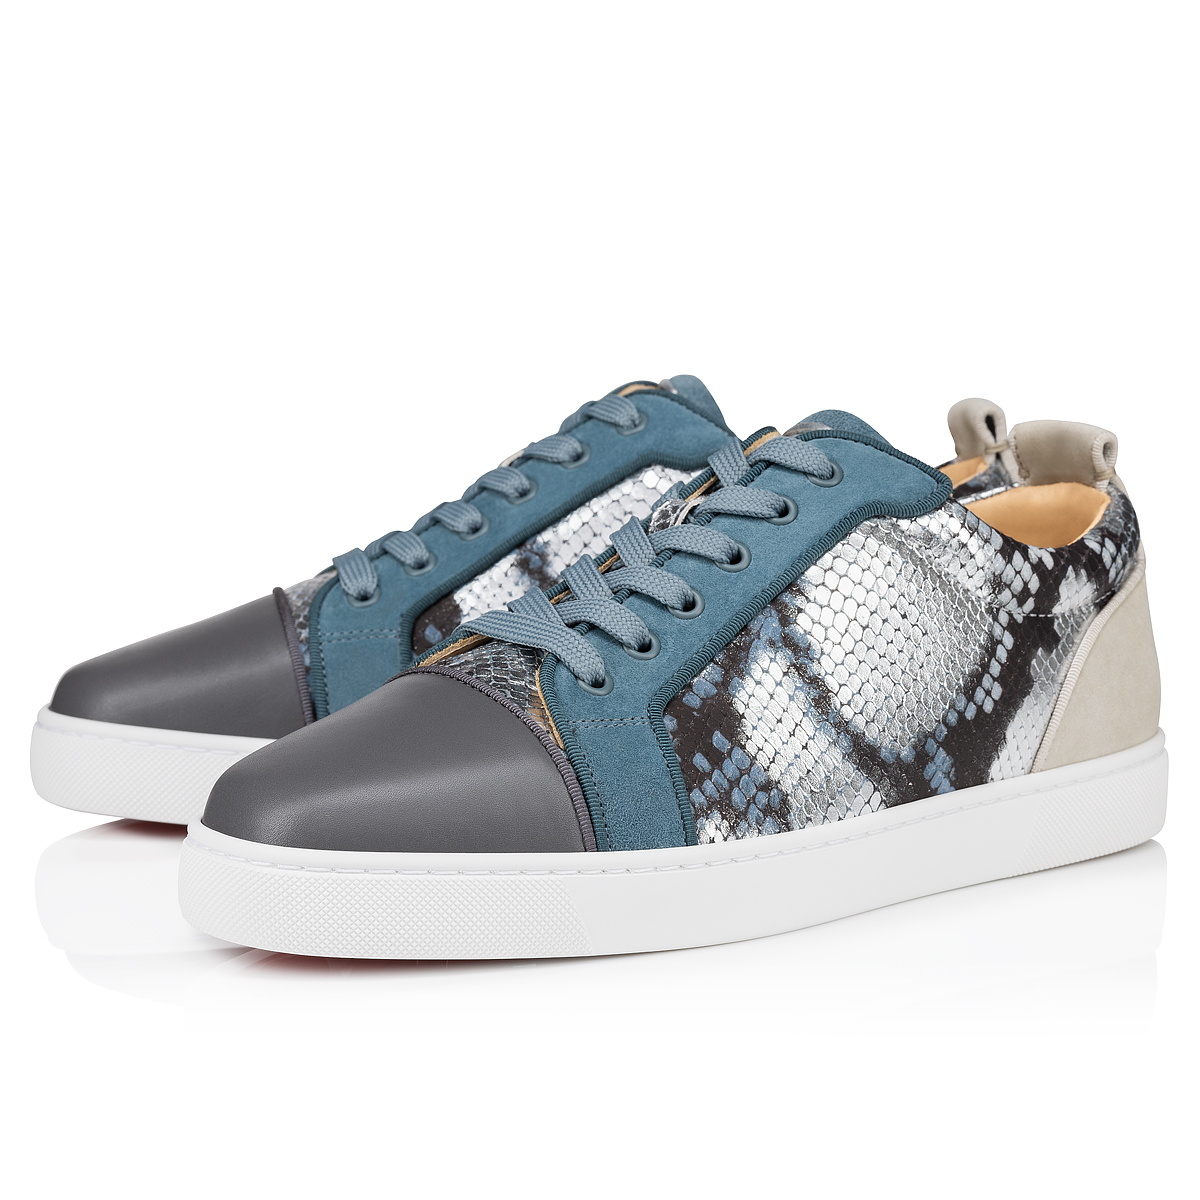 Christian Louboutin Mens Snakeskin Lou Spikes High-Top Sneakers Size 44/45  11.5